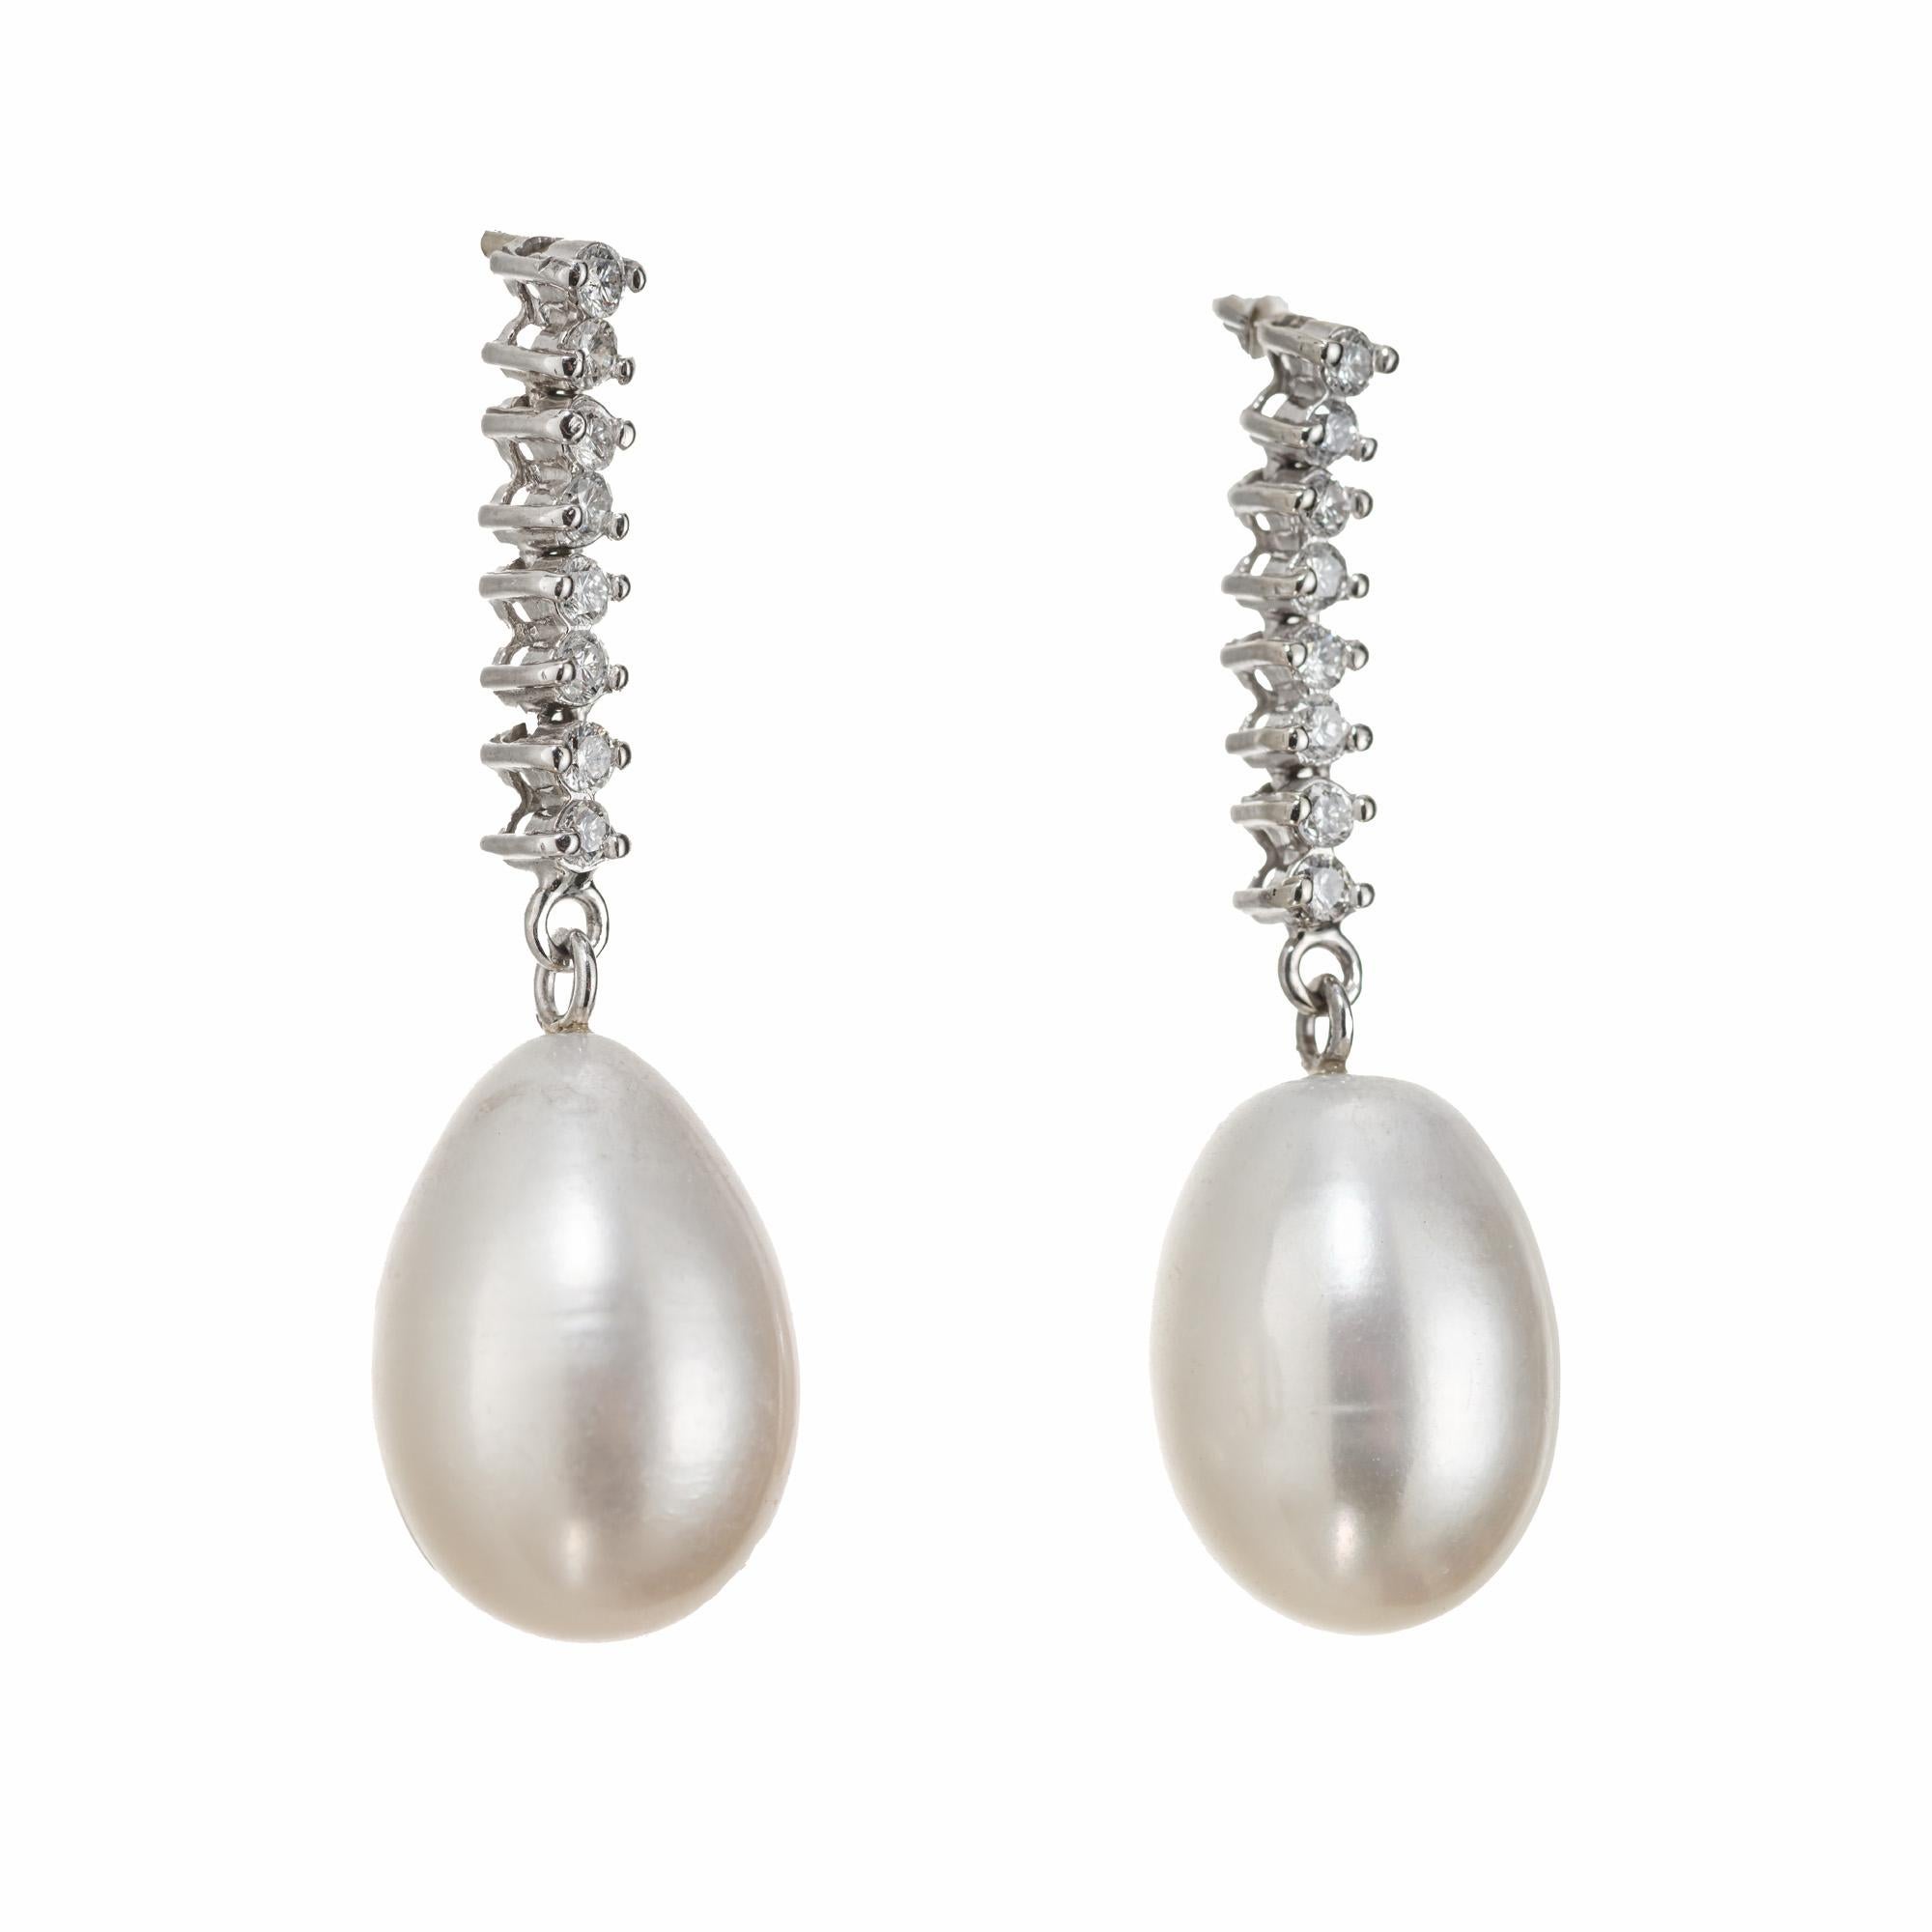 Tear drop freshwater cultured pearl and diamond dangle drop earrings. Wedding style, Two pear shaped, 10.5mm-14.7mm Pearls accented with 8 round cut diamonds in 14k white gold.

16 round diamonds, H-I SI approx. .32cts
2 freshwater white pearl